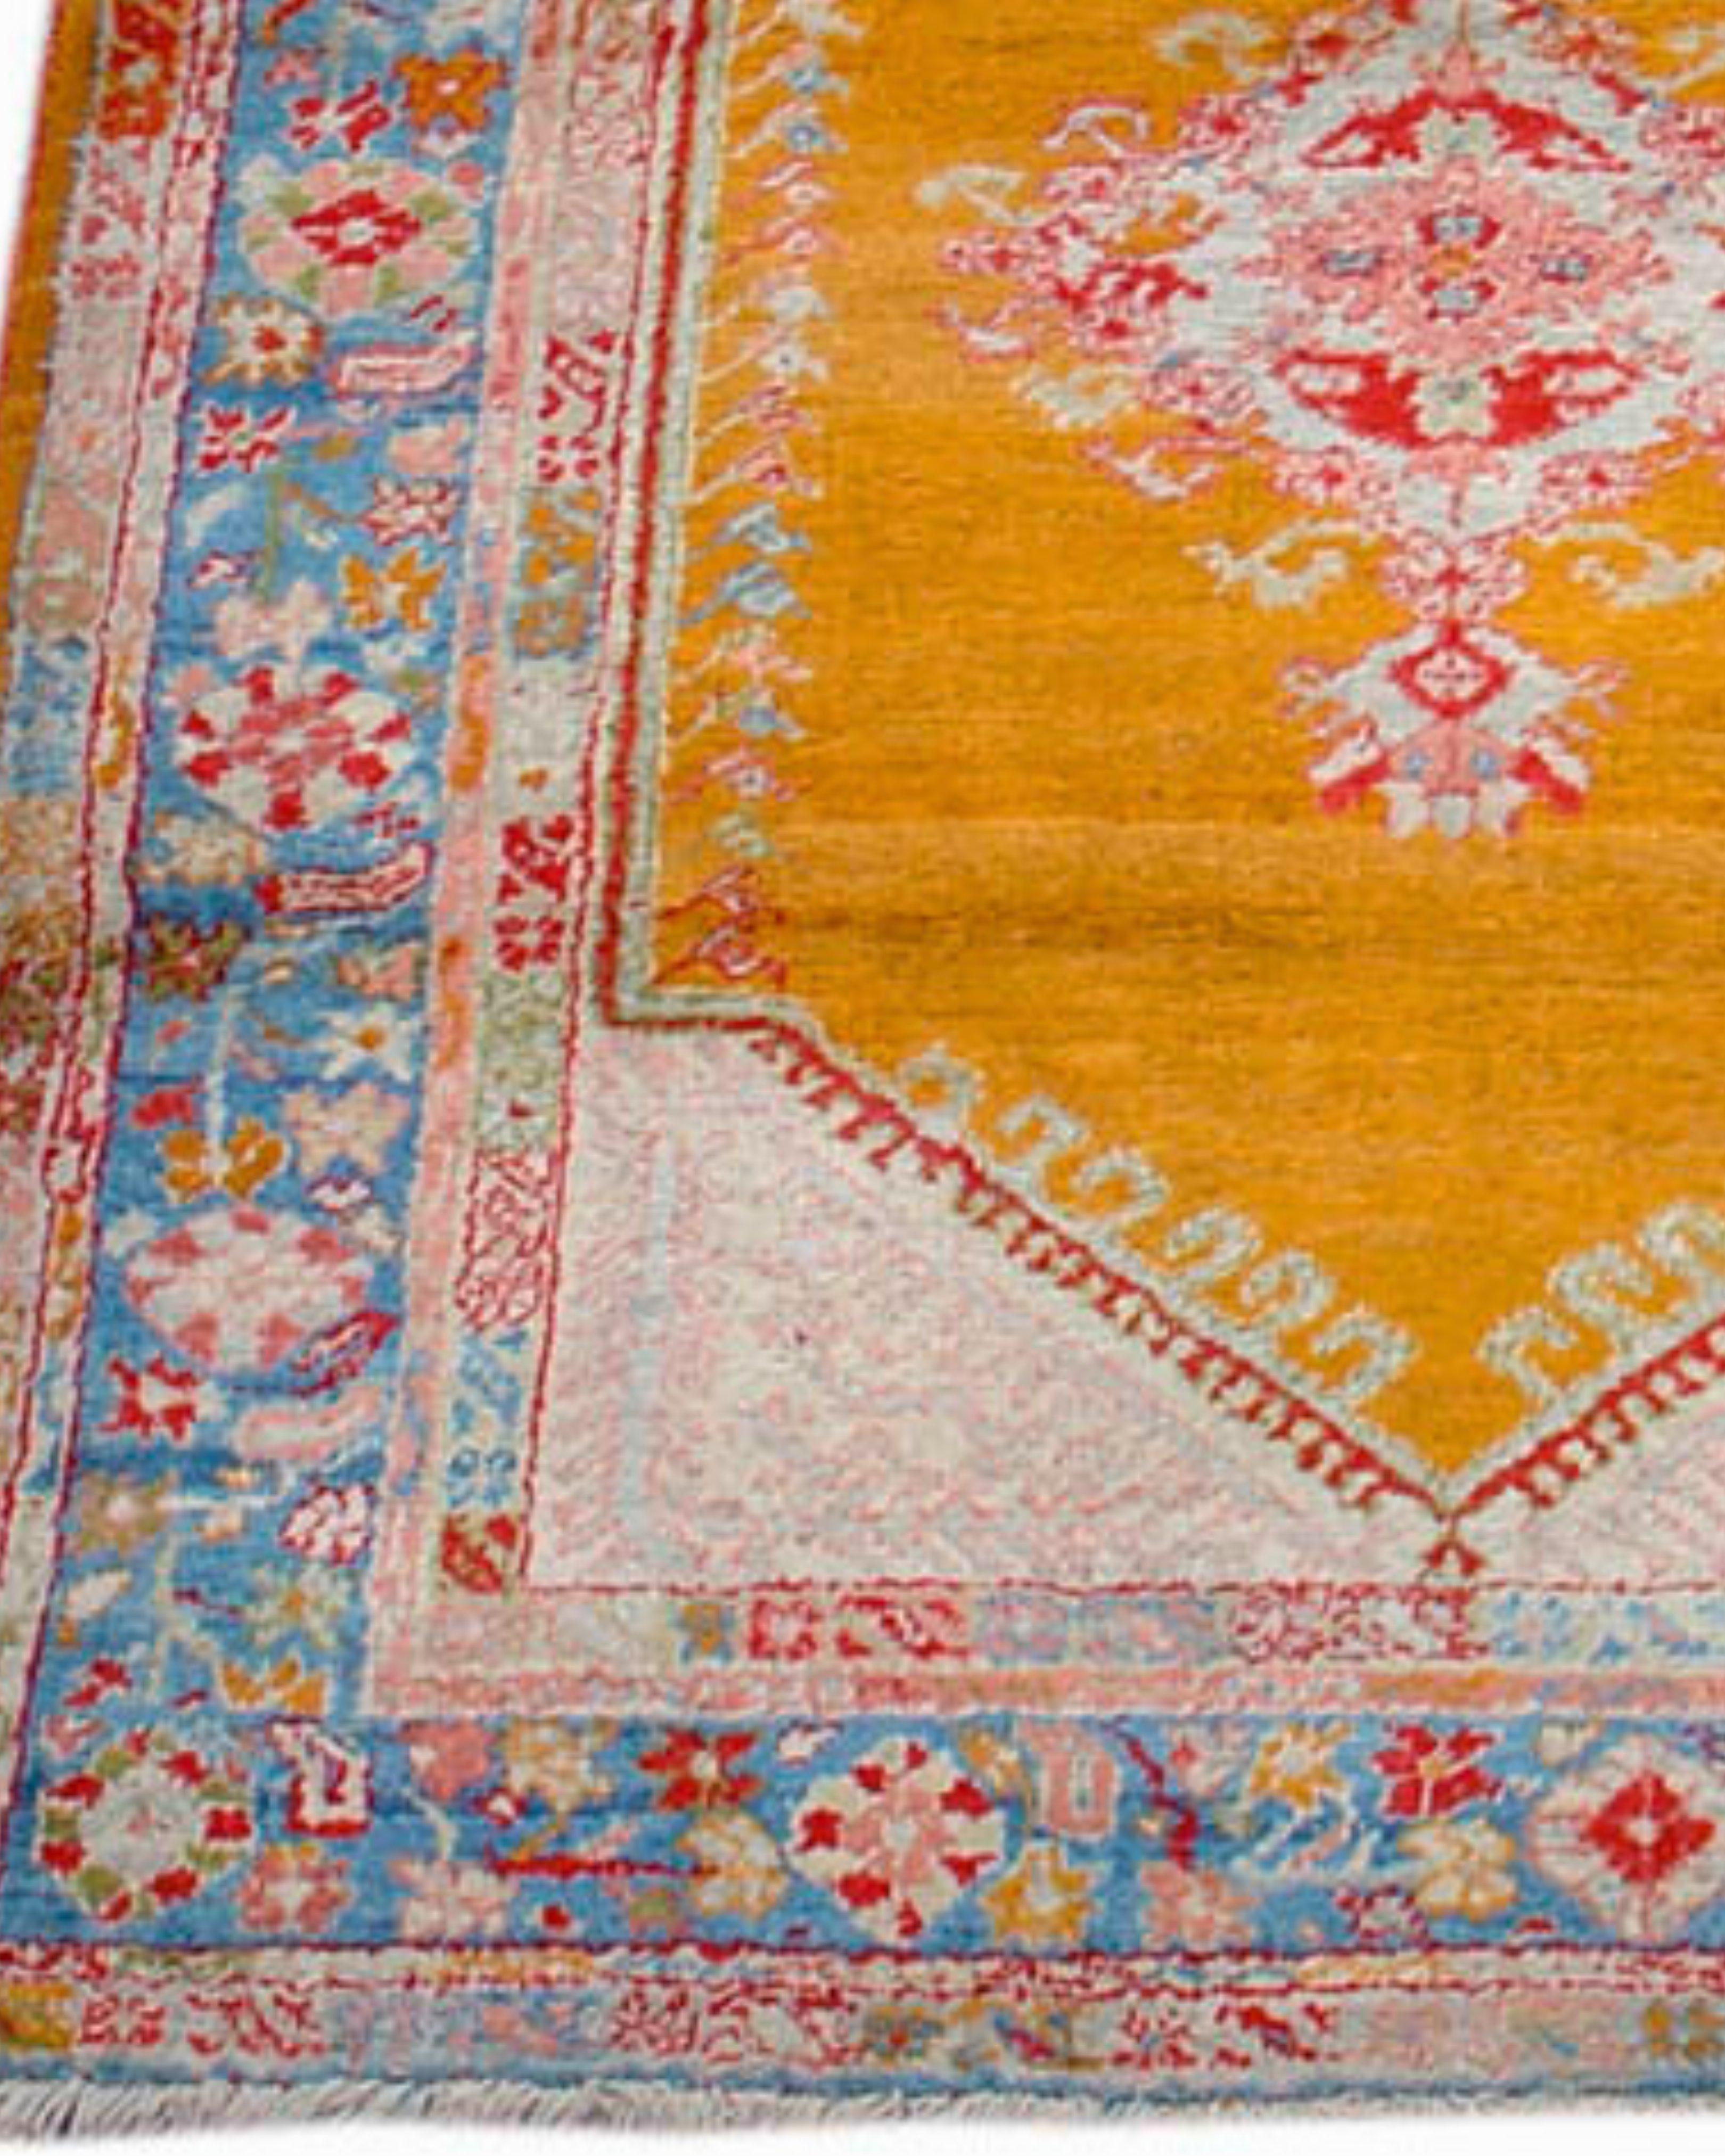 Wool Antique Angora Oushak Rug with Saffron Yellow Field, Late 19th Century For Sale